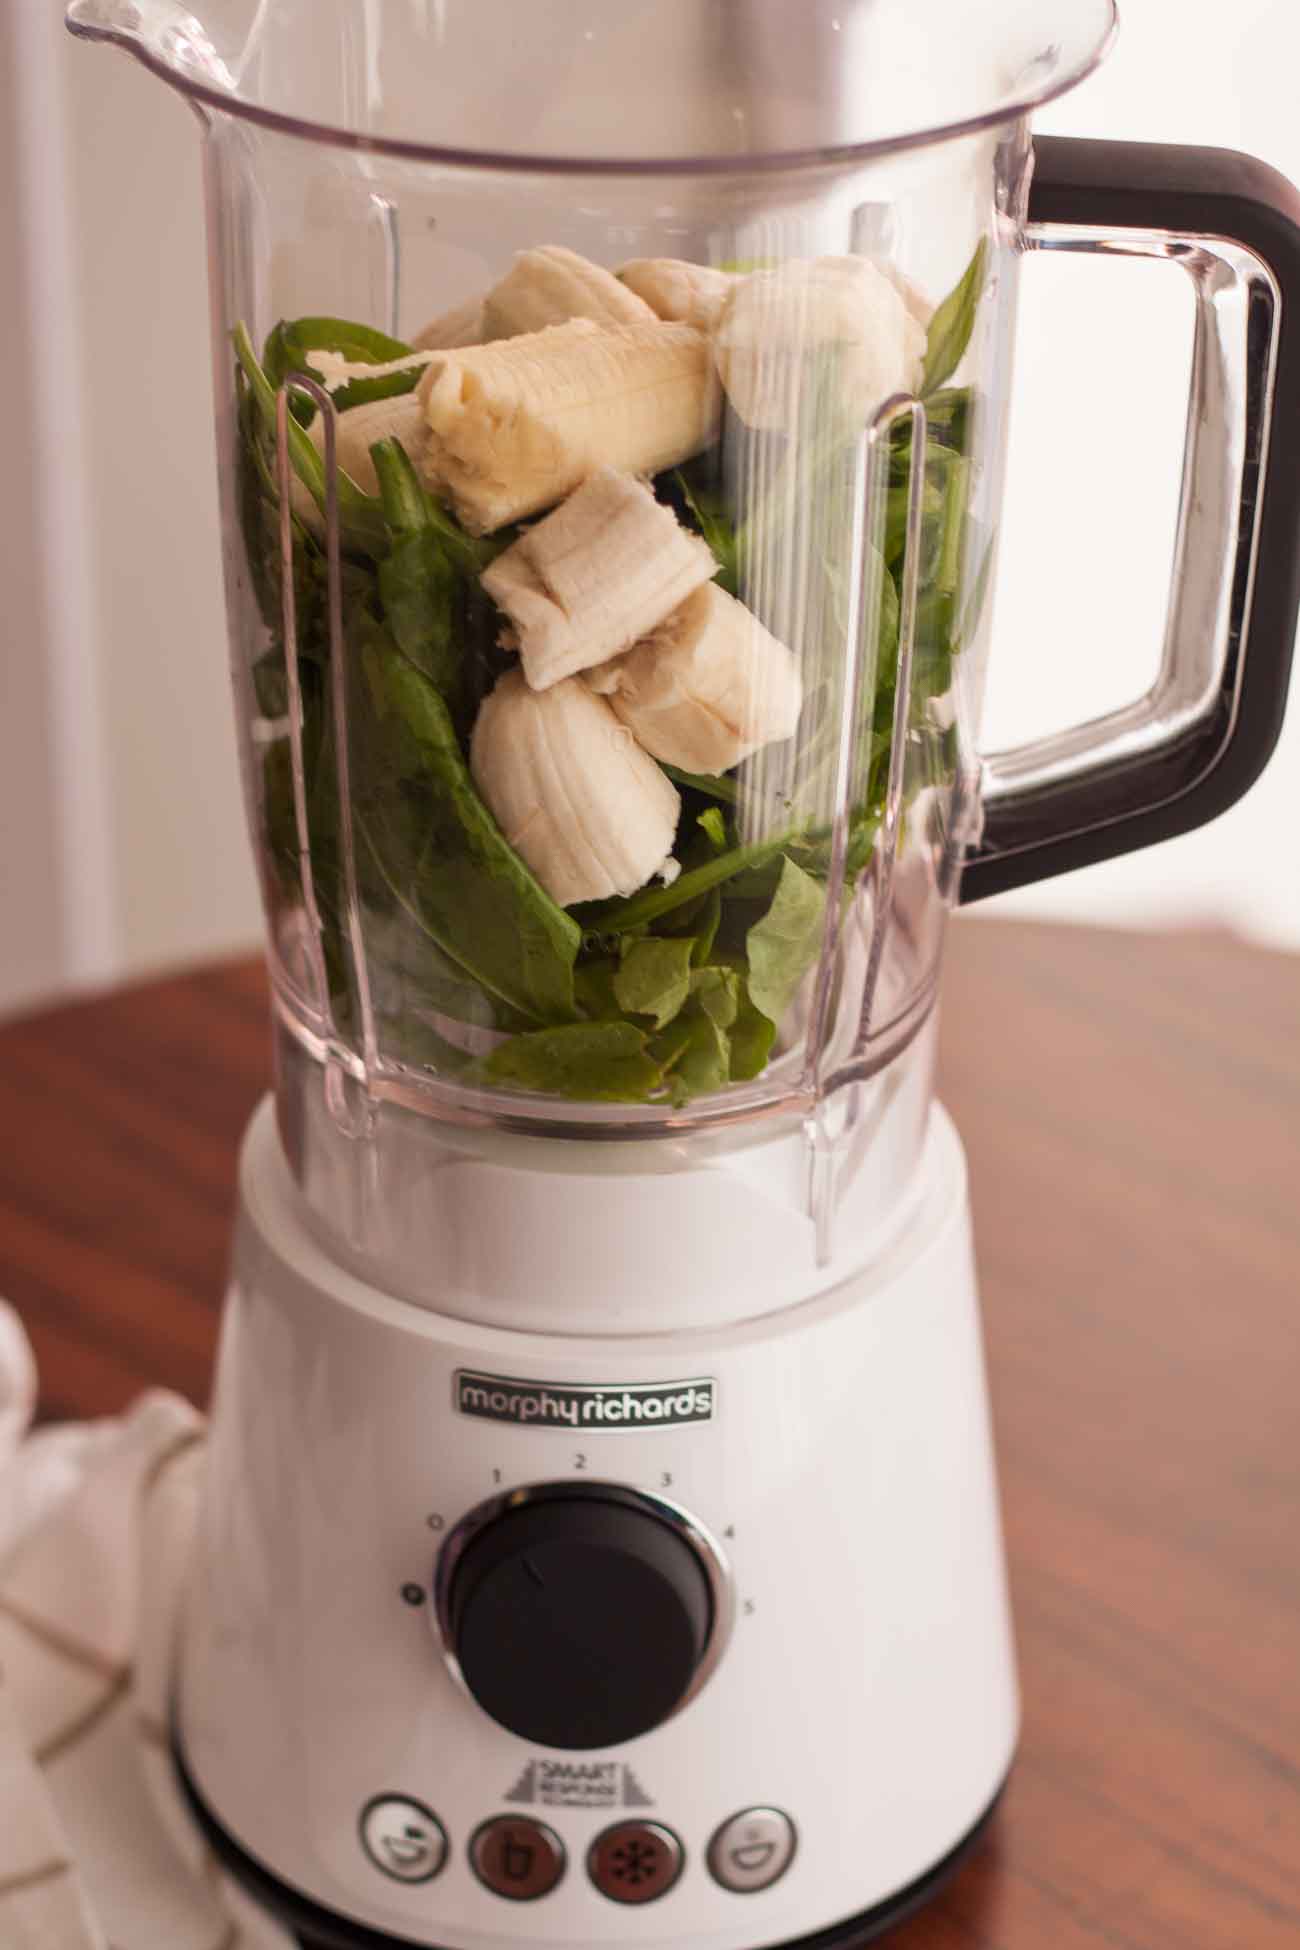 Morphy Richards Total Control Blender Spinach Banana Smoothie With Chia Seeds Recipe 10